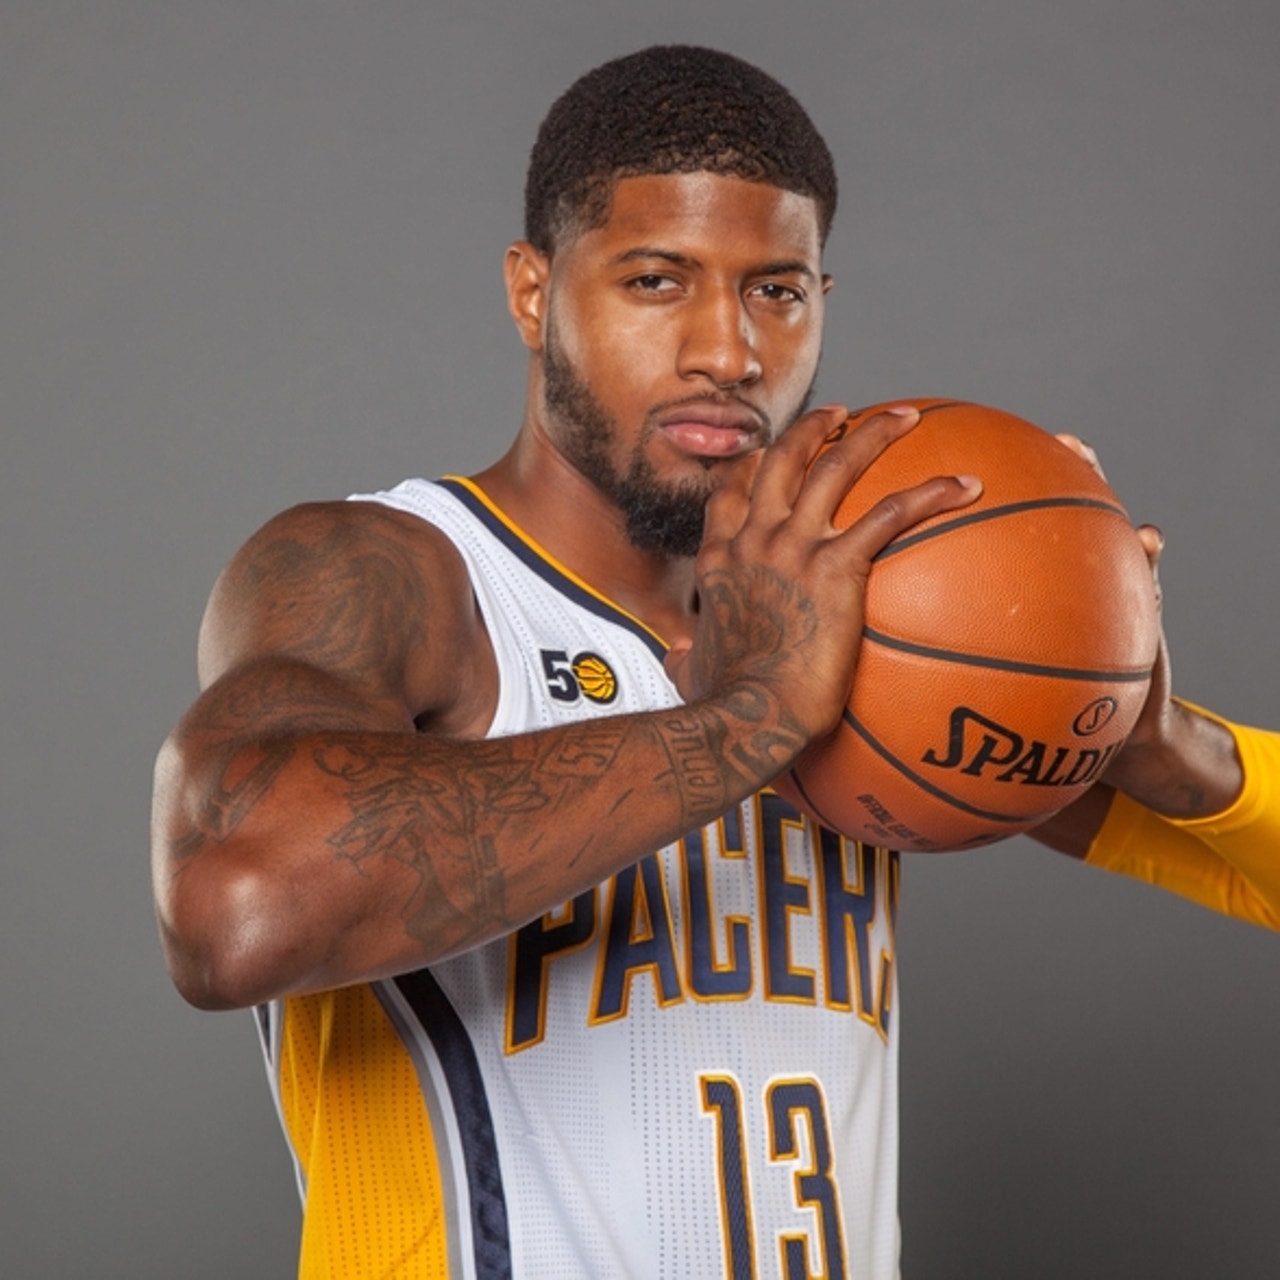 Paul George: Indiana Pacers star has MVP aspirations - Sports Illustrated